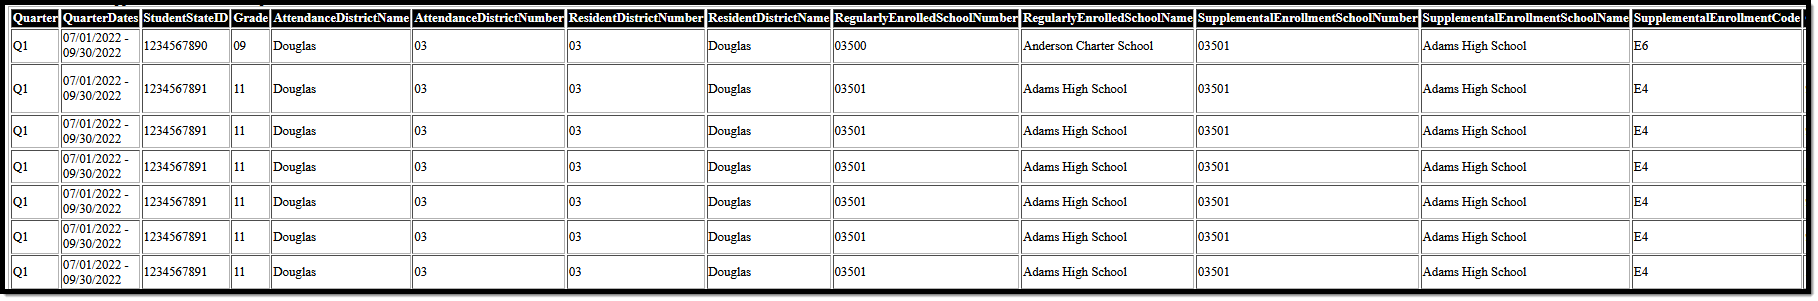 Image of the Non-Traditional Supplemental Student Attendance Report in HTML format.